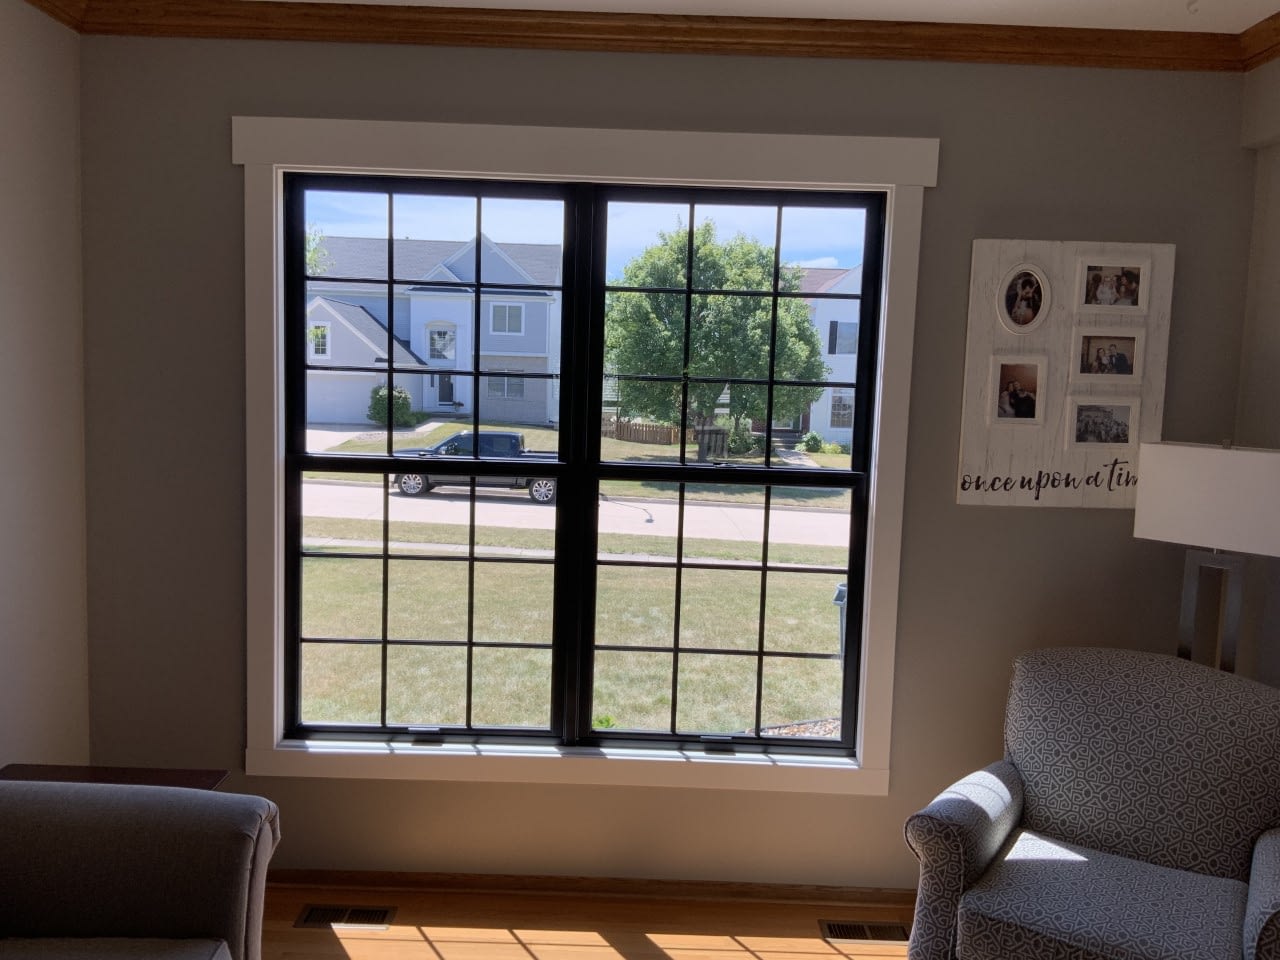 New black on black Infinity from Marvin full frame double hung window in West Des Moines Iowa